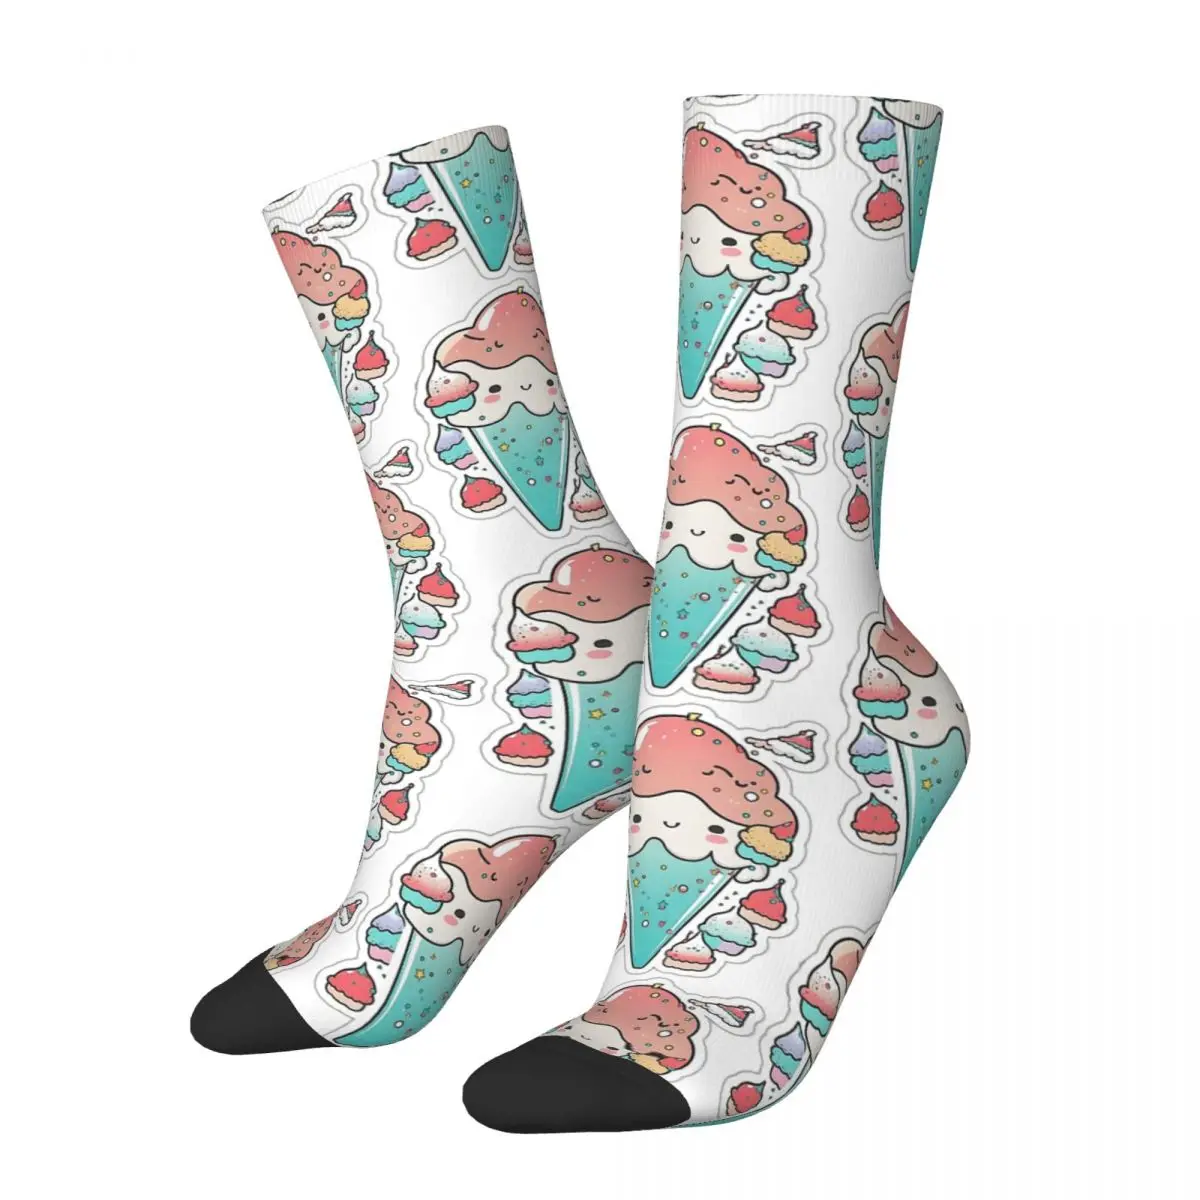 

Cute Chibi Ice Crazy Men's compression Socks Unisex A must-have for summer Harajuku Pattern Printed Funny Happy Crew Sock